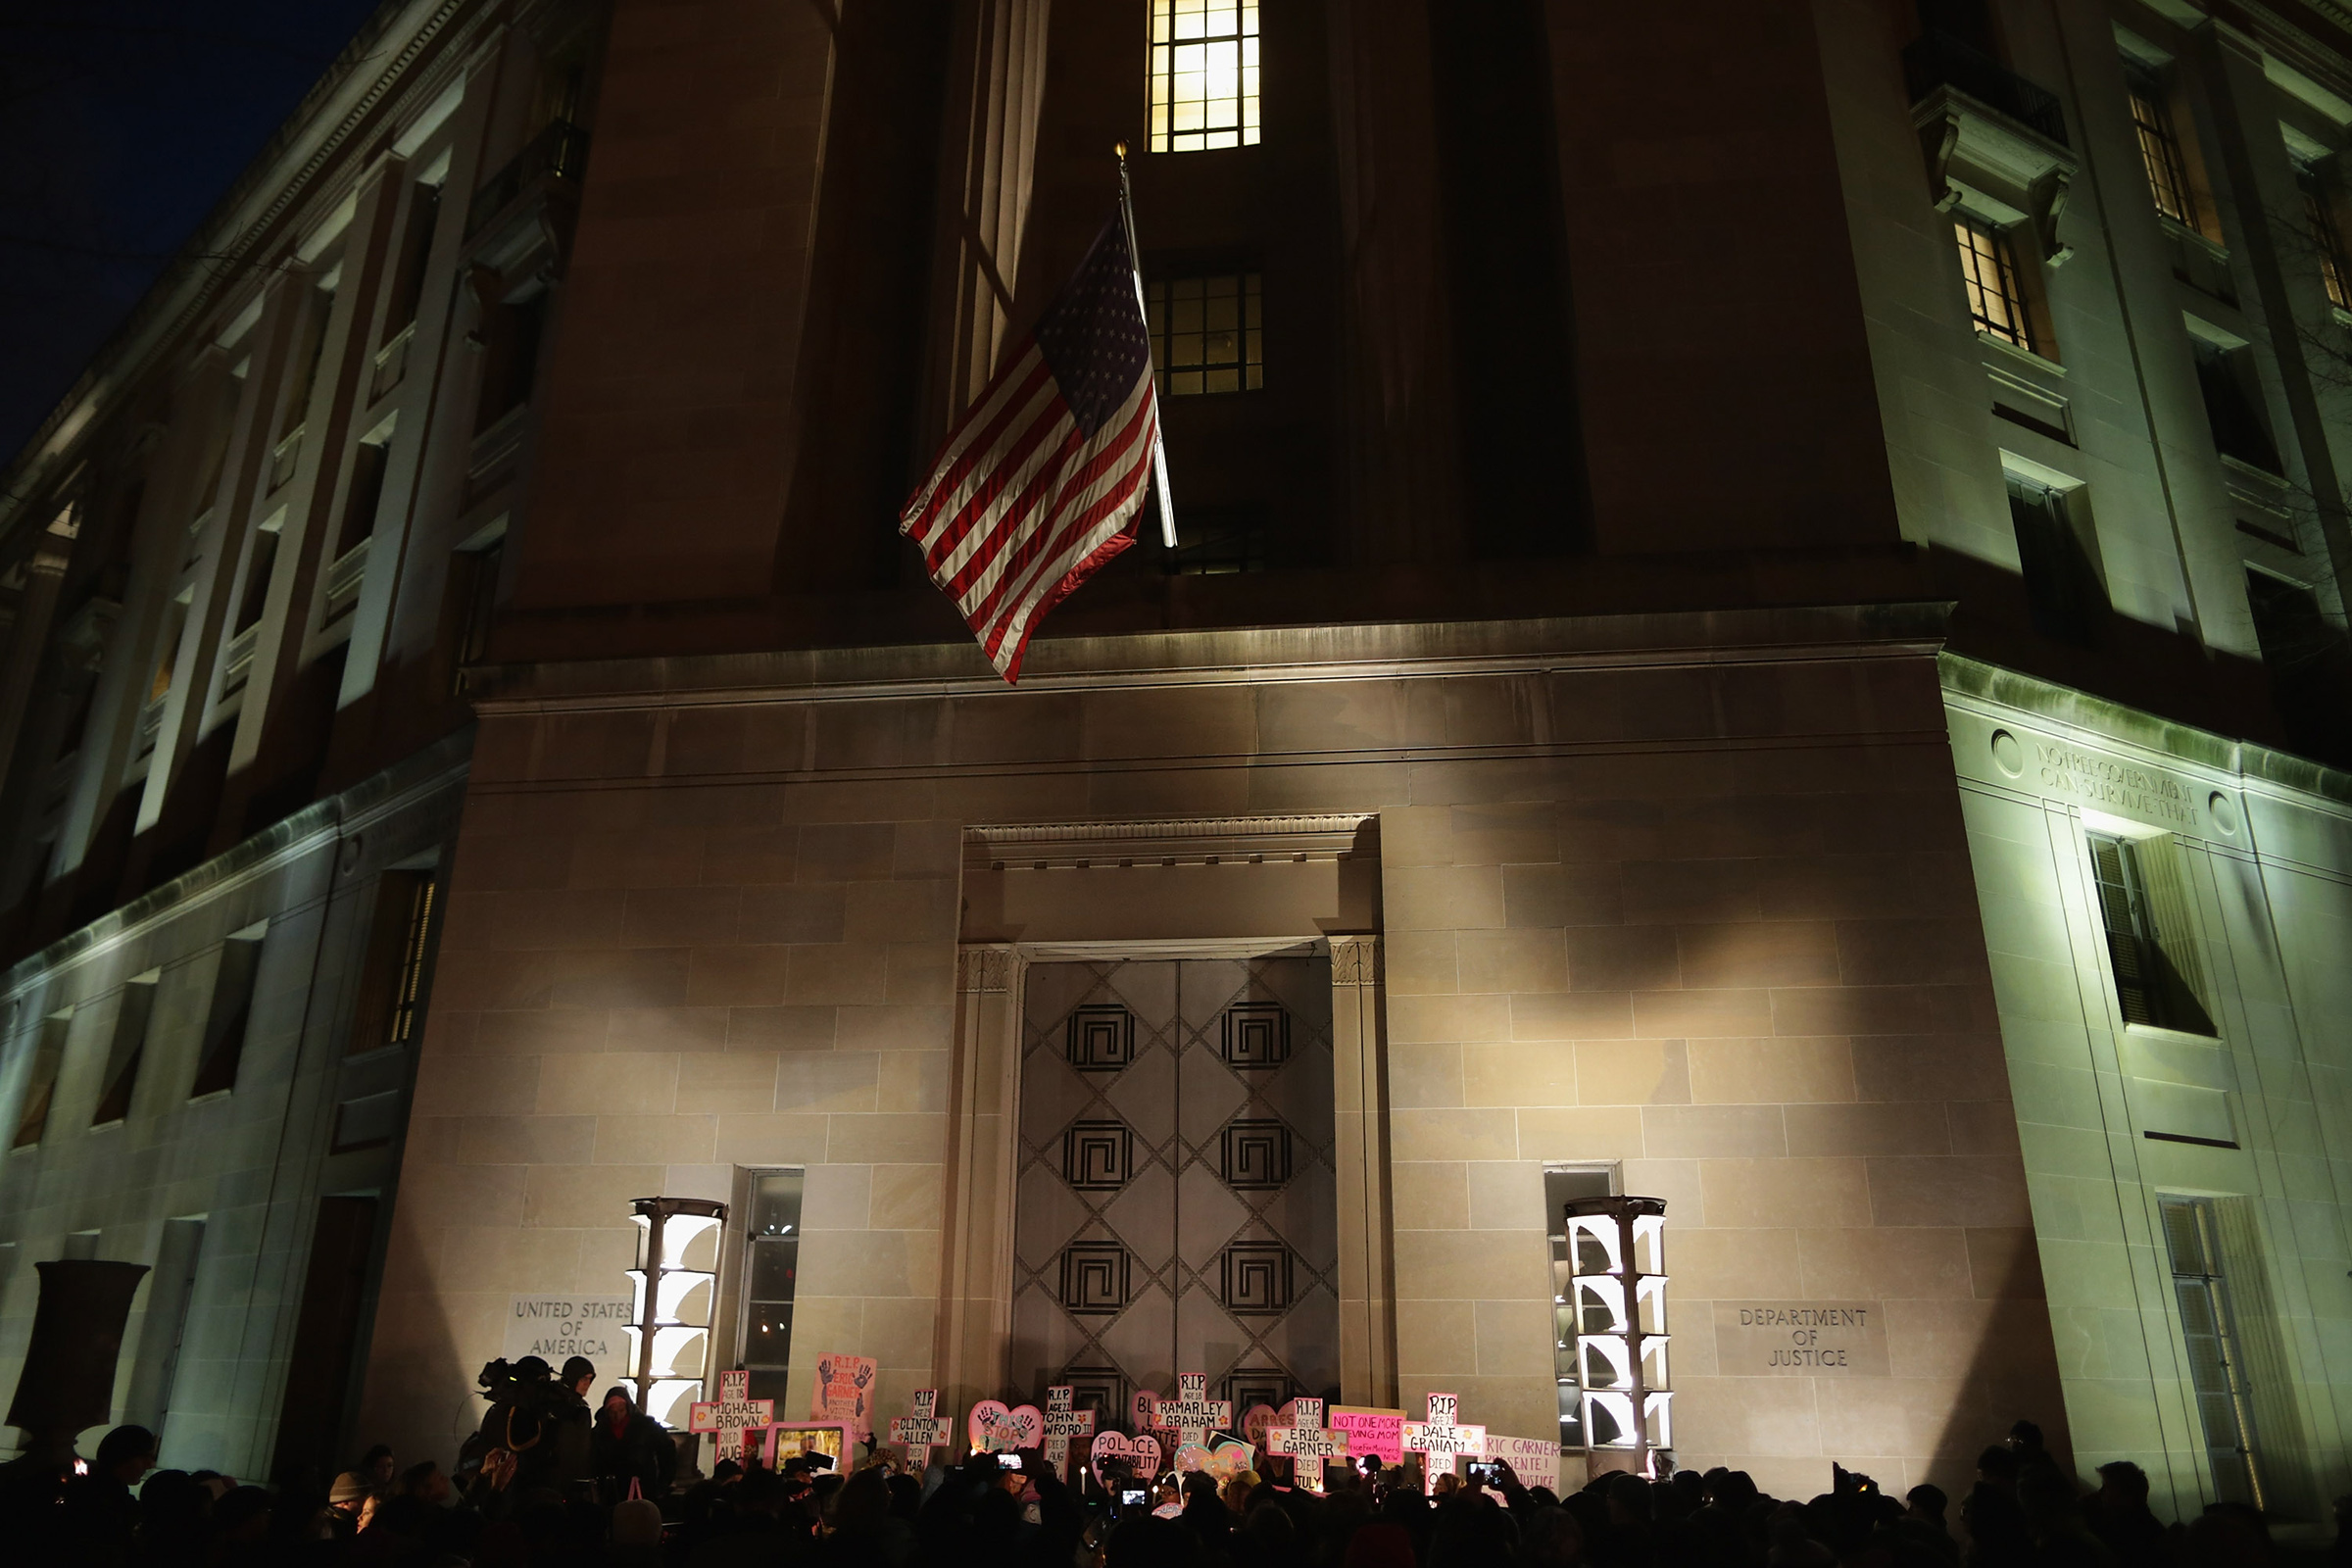 Code Pink for Peace and Mothers Against Police Brutality organize a protest outside the Justice Department, joining mothers whose unarmed sons where killed by police and other demonstrators in Washington, D.C. on Dec. 10, 2014. (Chip Somodevilla—Getty Images)